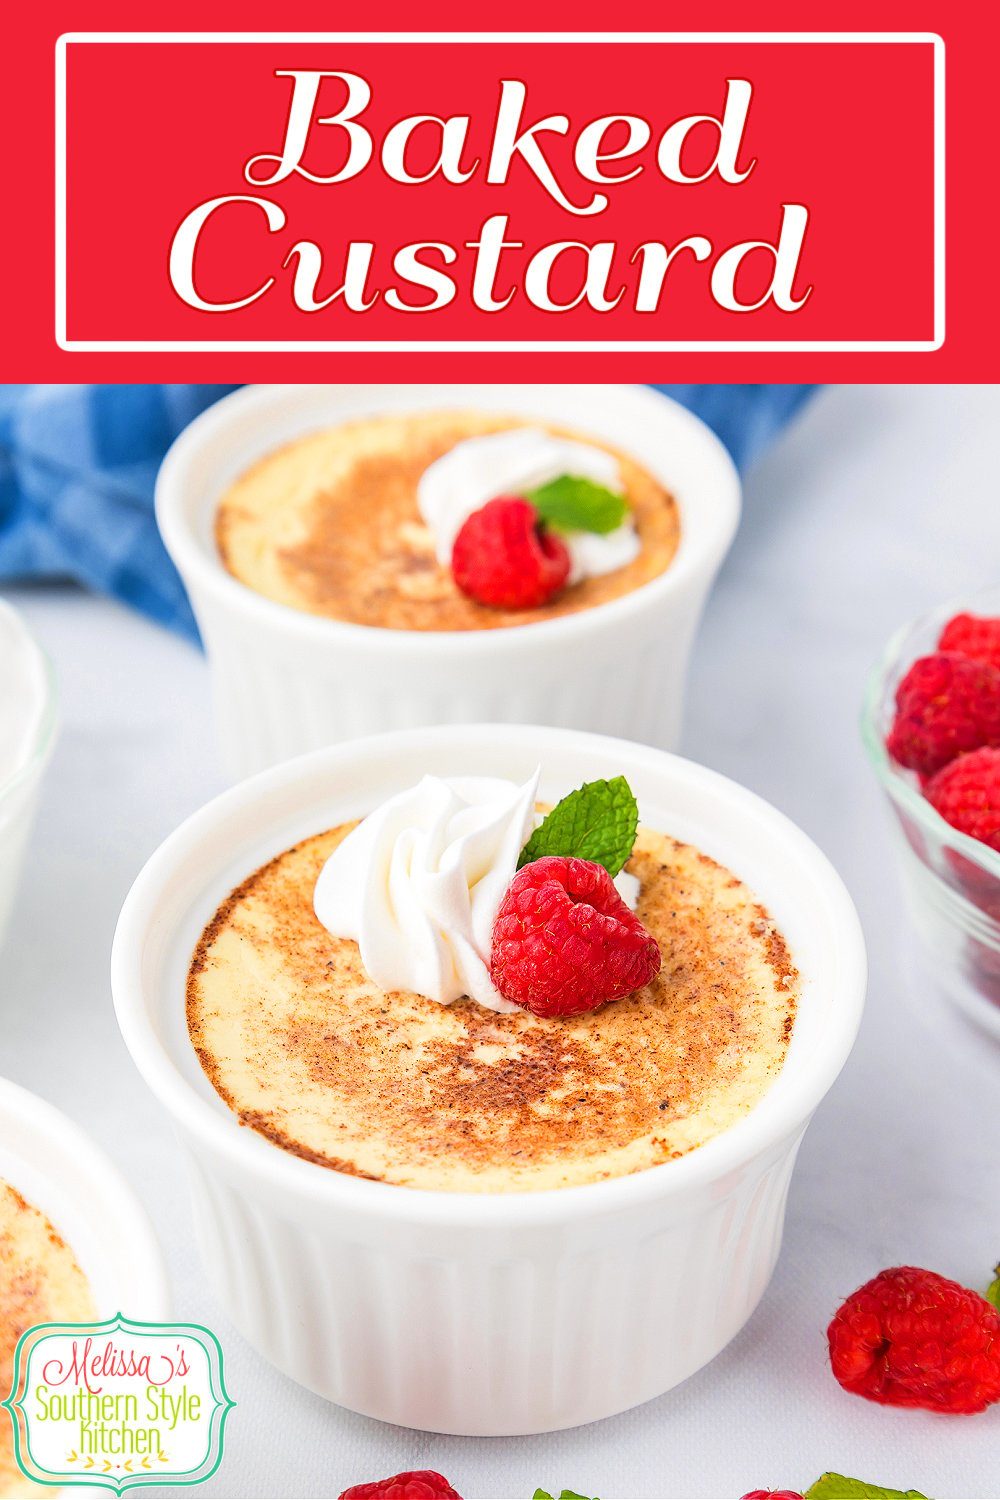 This rich and delicious old fashioned Baked Custard Recipe is made with pantry ingredients that are certain to satisfy your sweets craving. #bakedcustard #custardrecipes #easybakedcustard #custard #easydesserts #easydessertrecipe